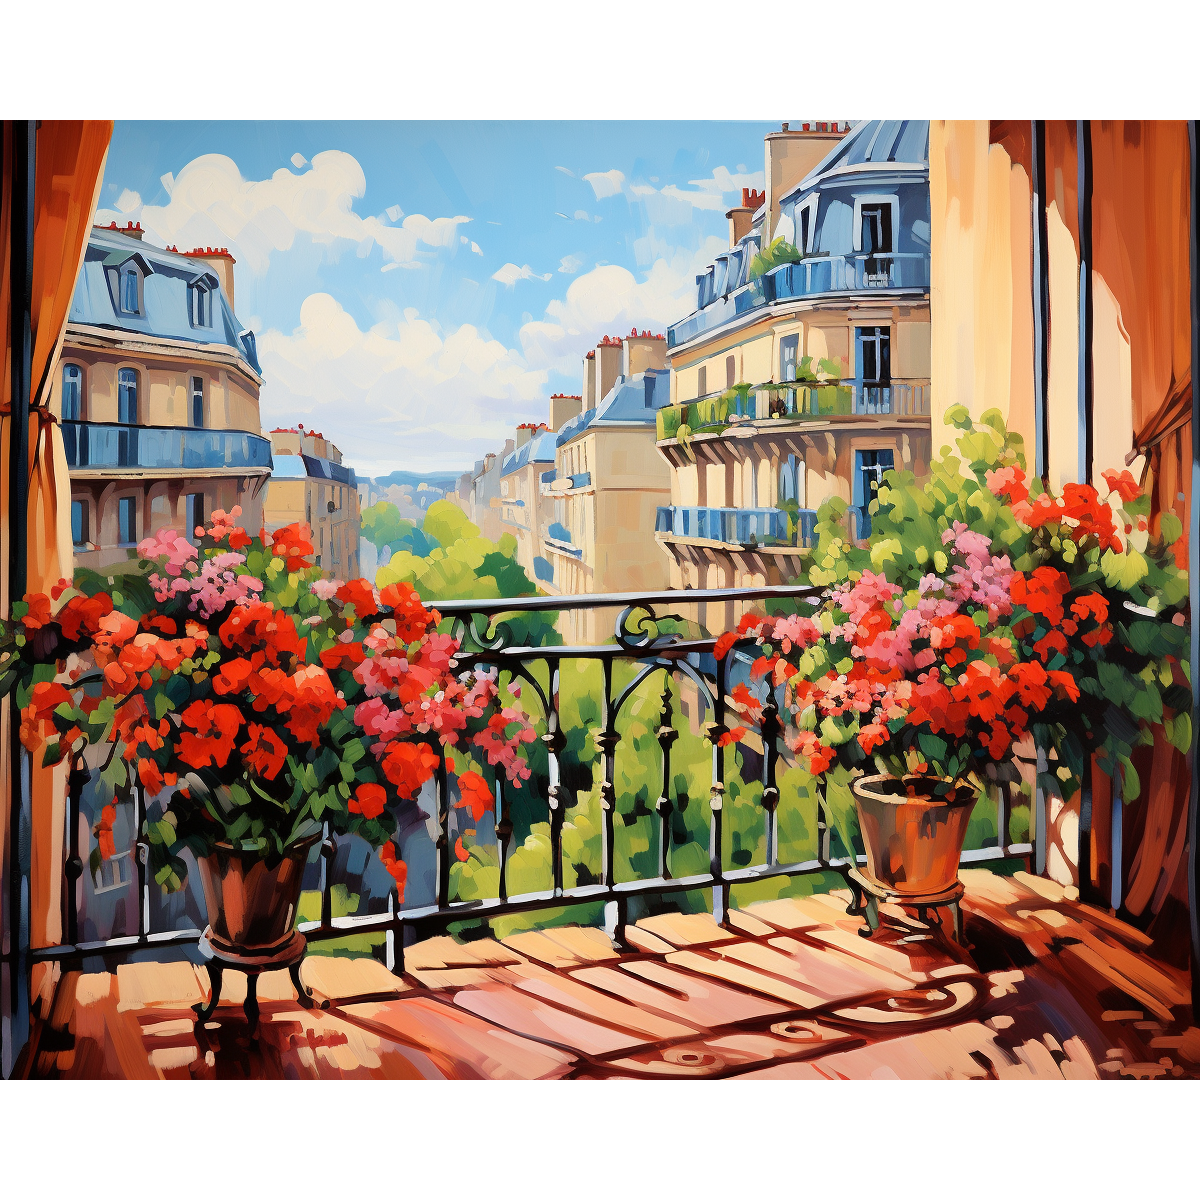 Floral Balcony